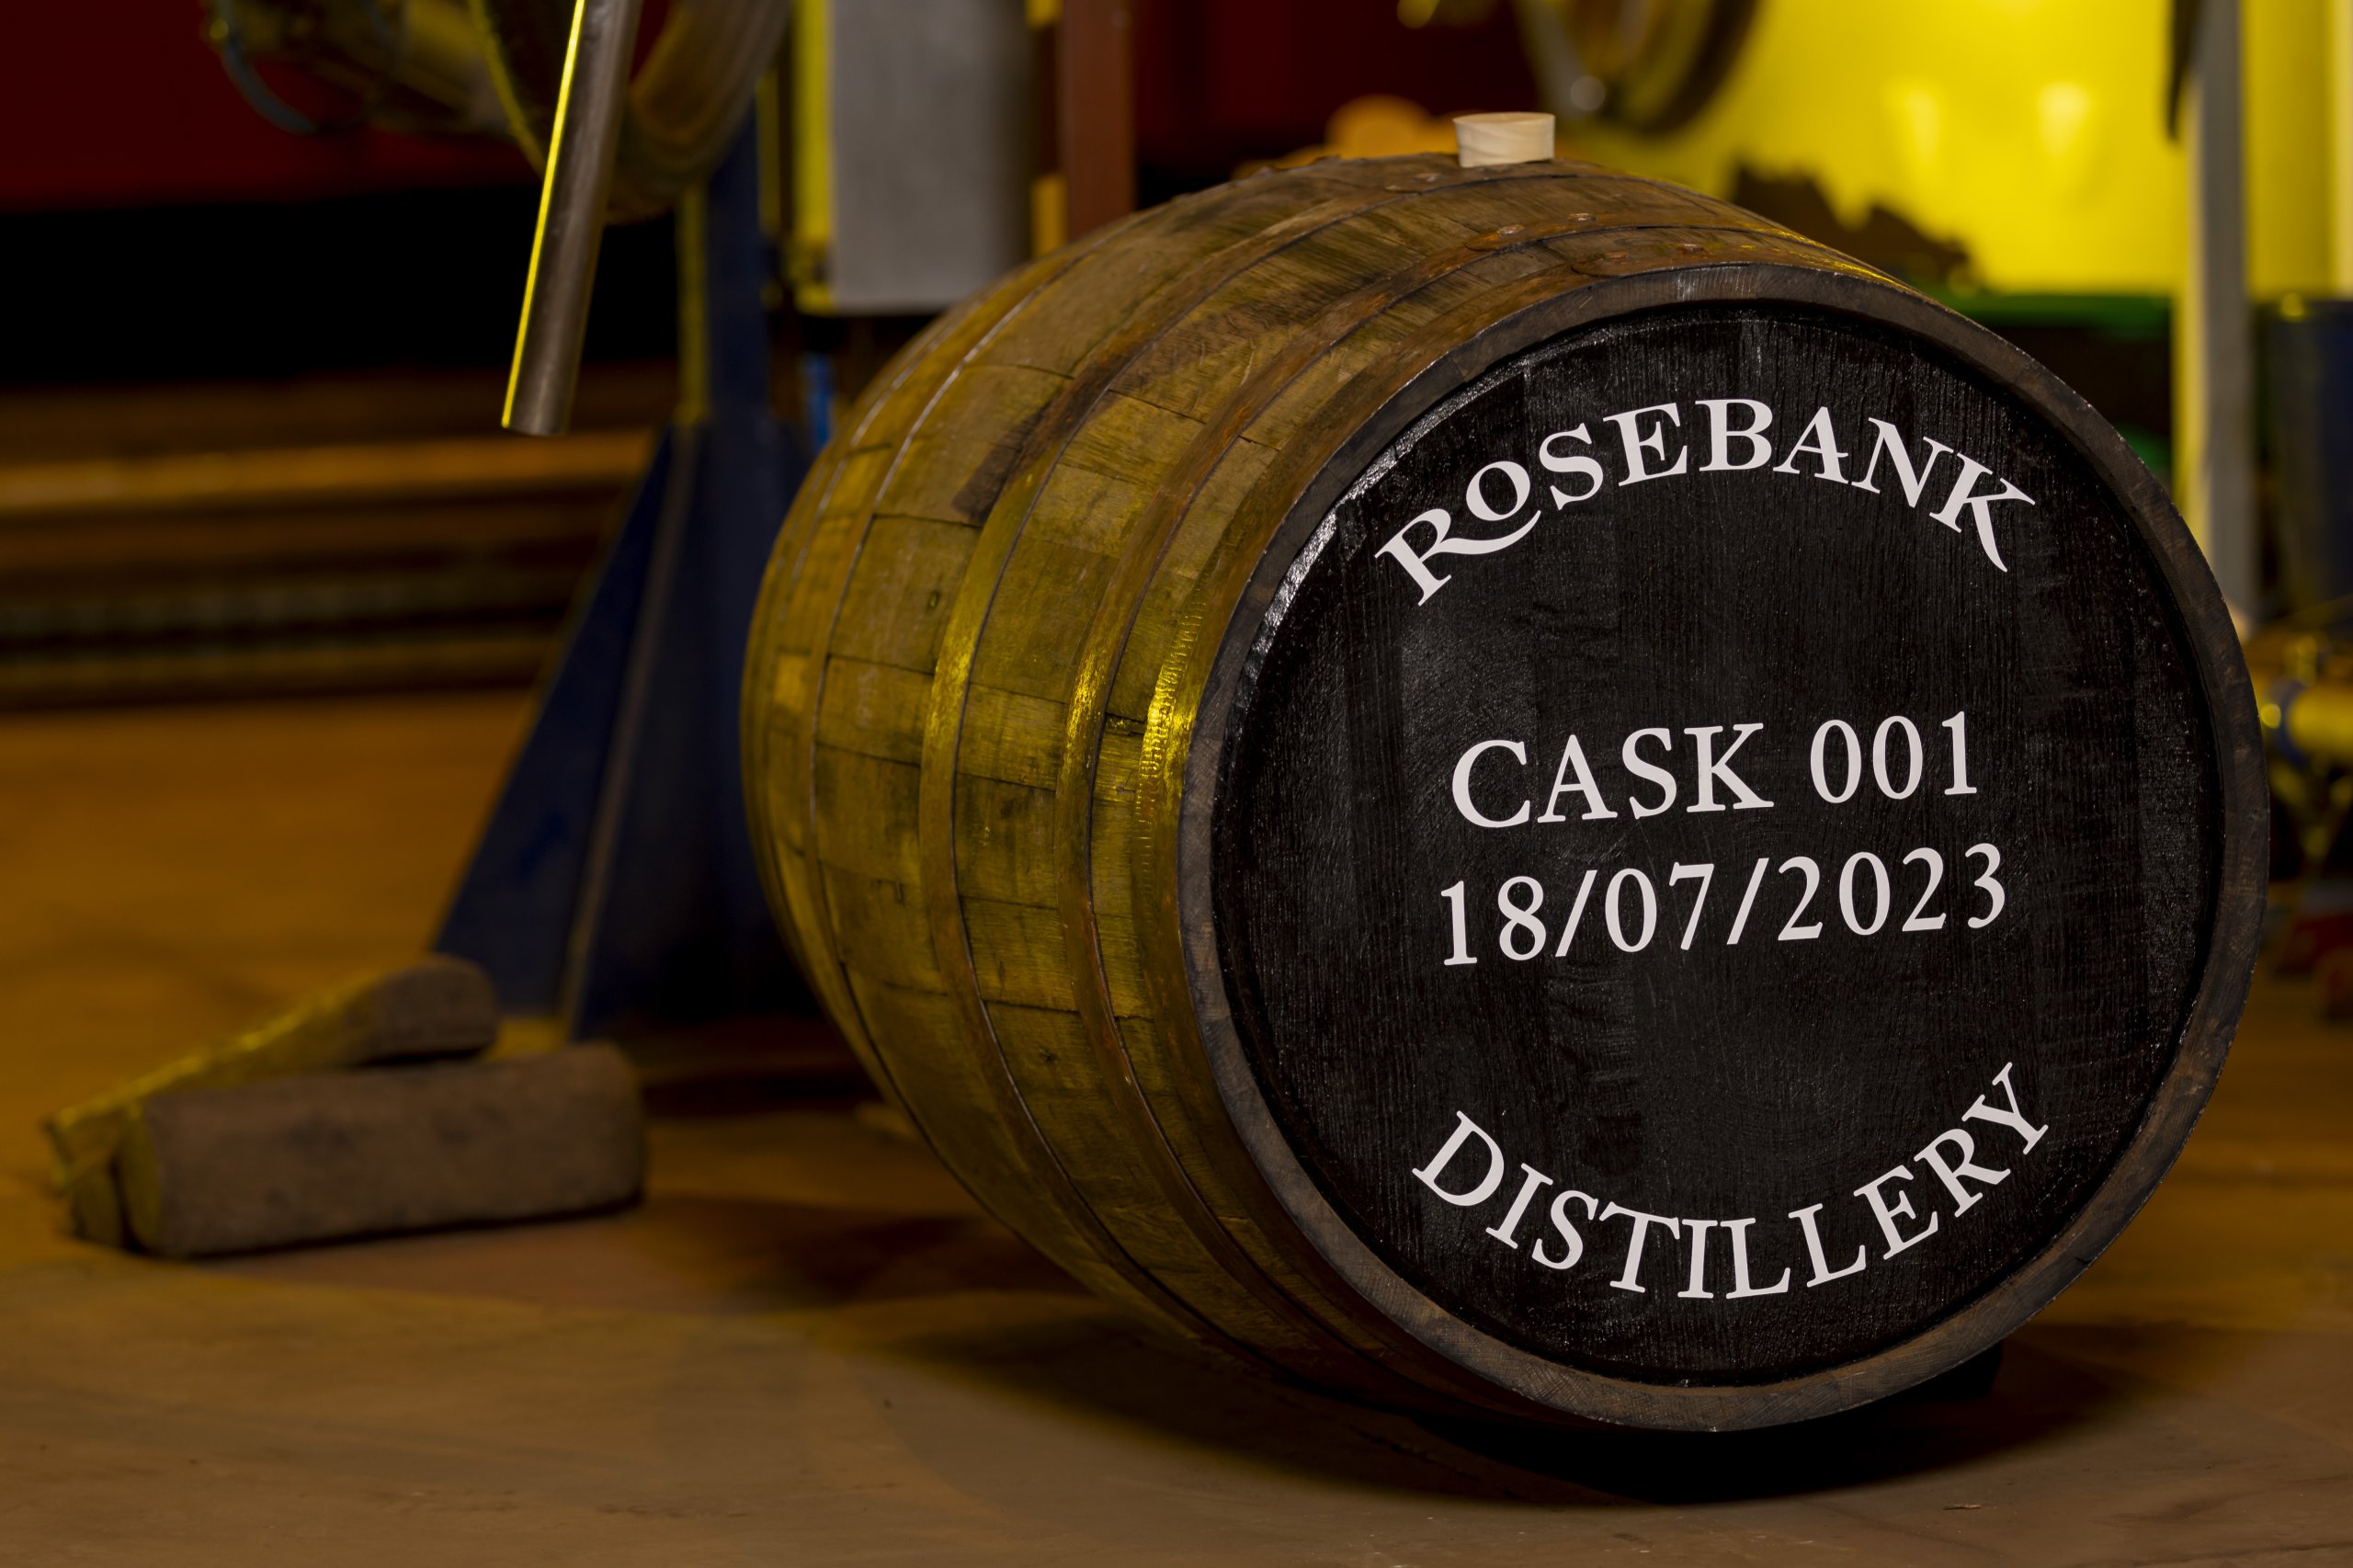 The first cask of whisky distilled at the revived Rosebank Distillery. Image courtesy Ian Macleod Distillers.